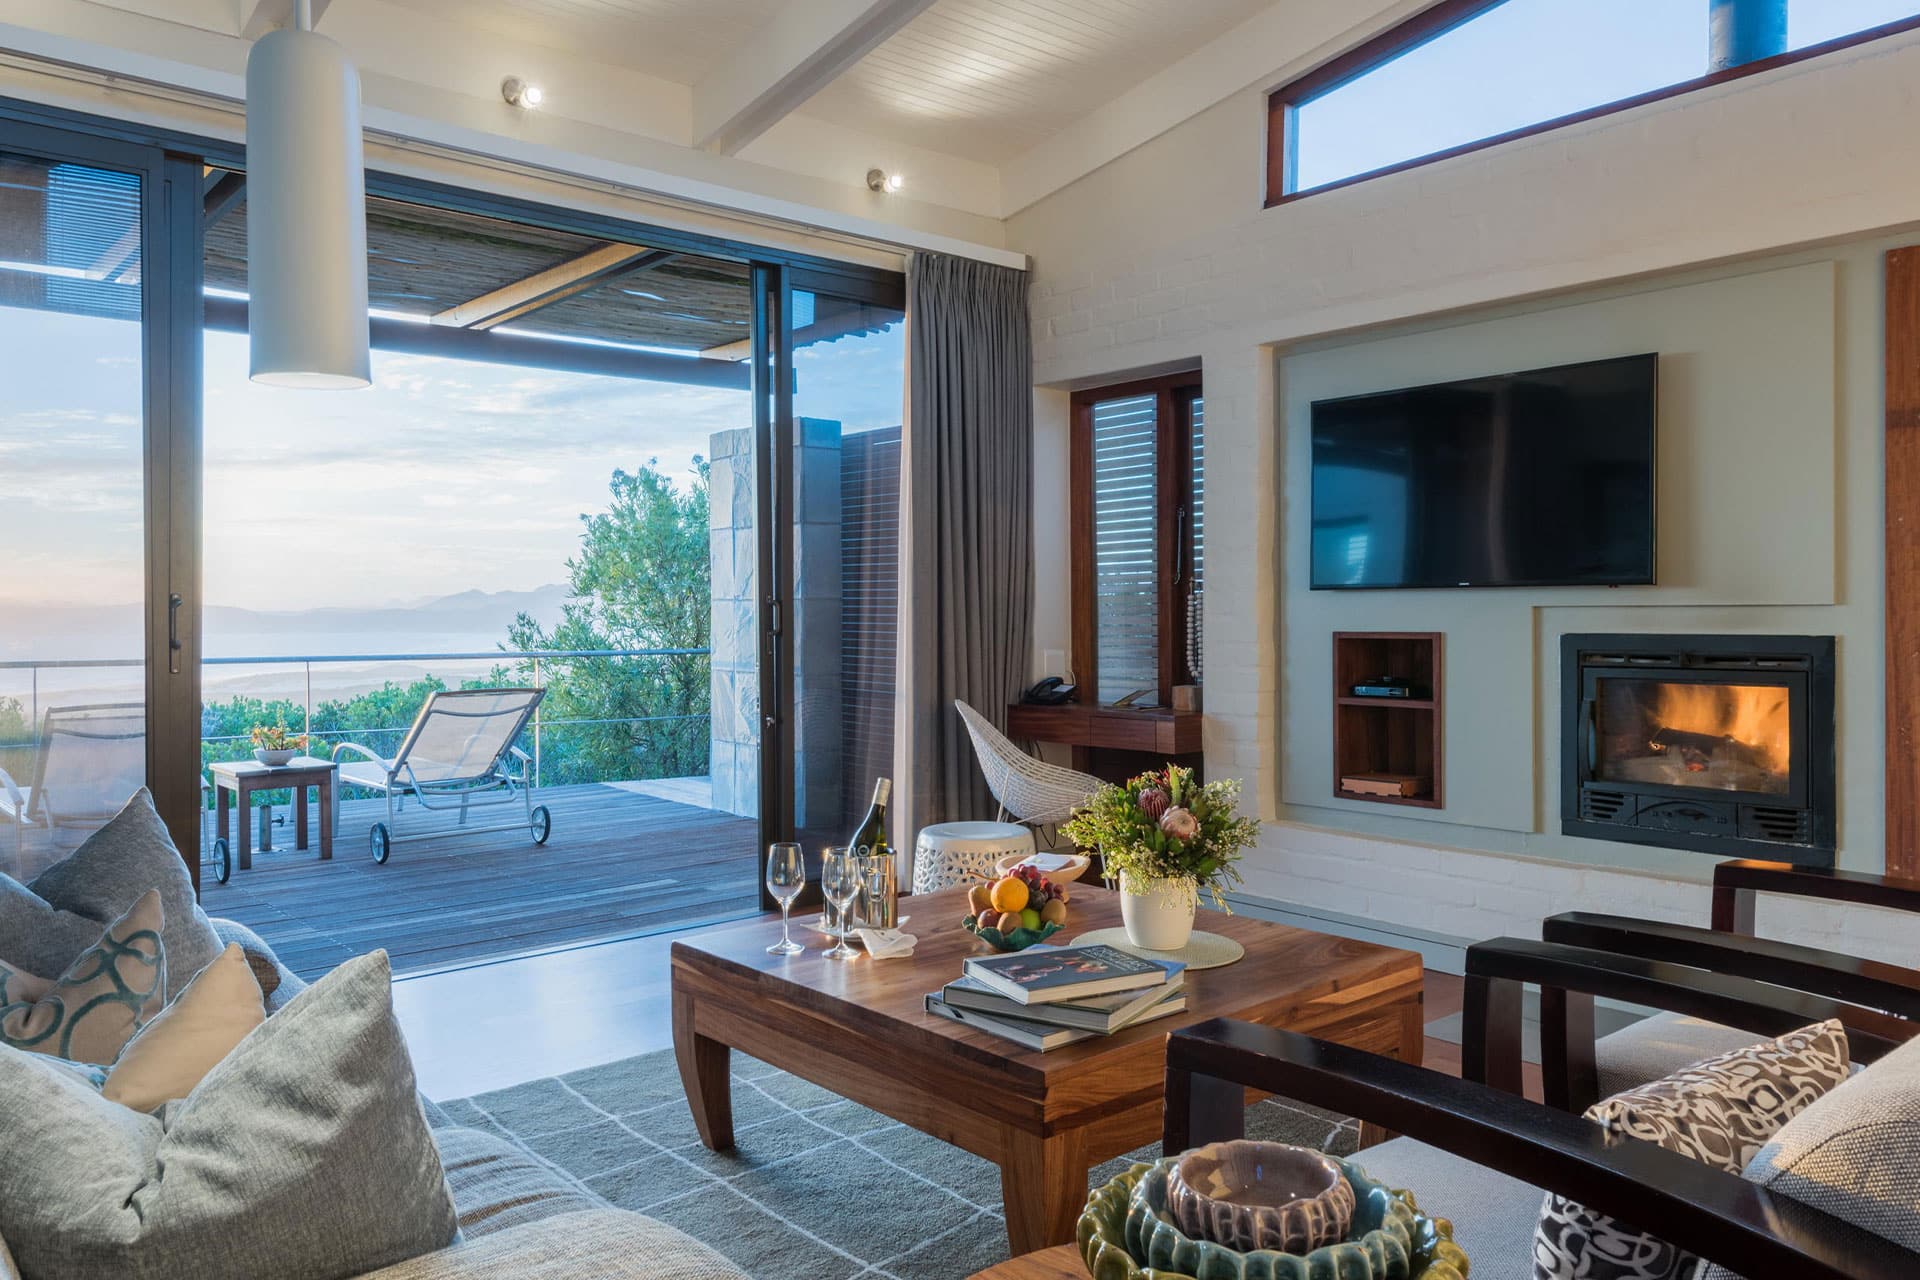 A hotel suite lounge with TV and fireplace and a view at Grootbos Private Nature Reserve